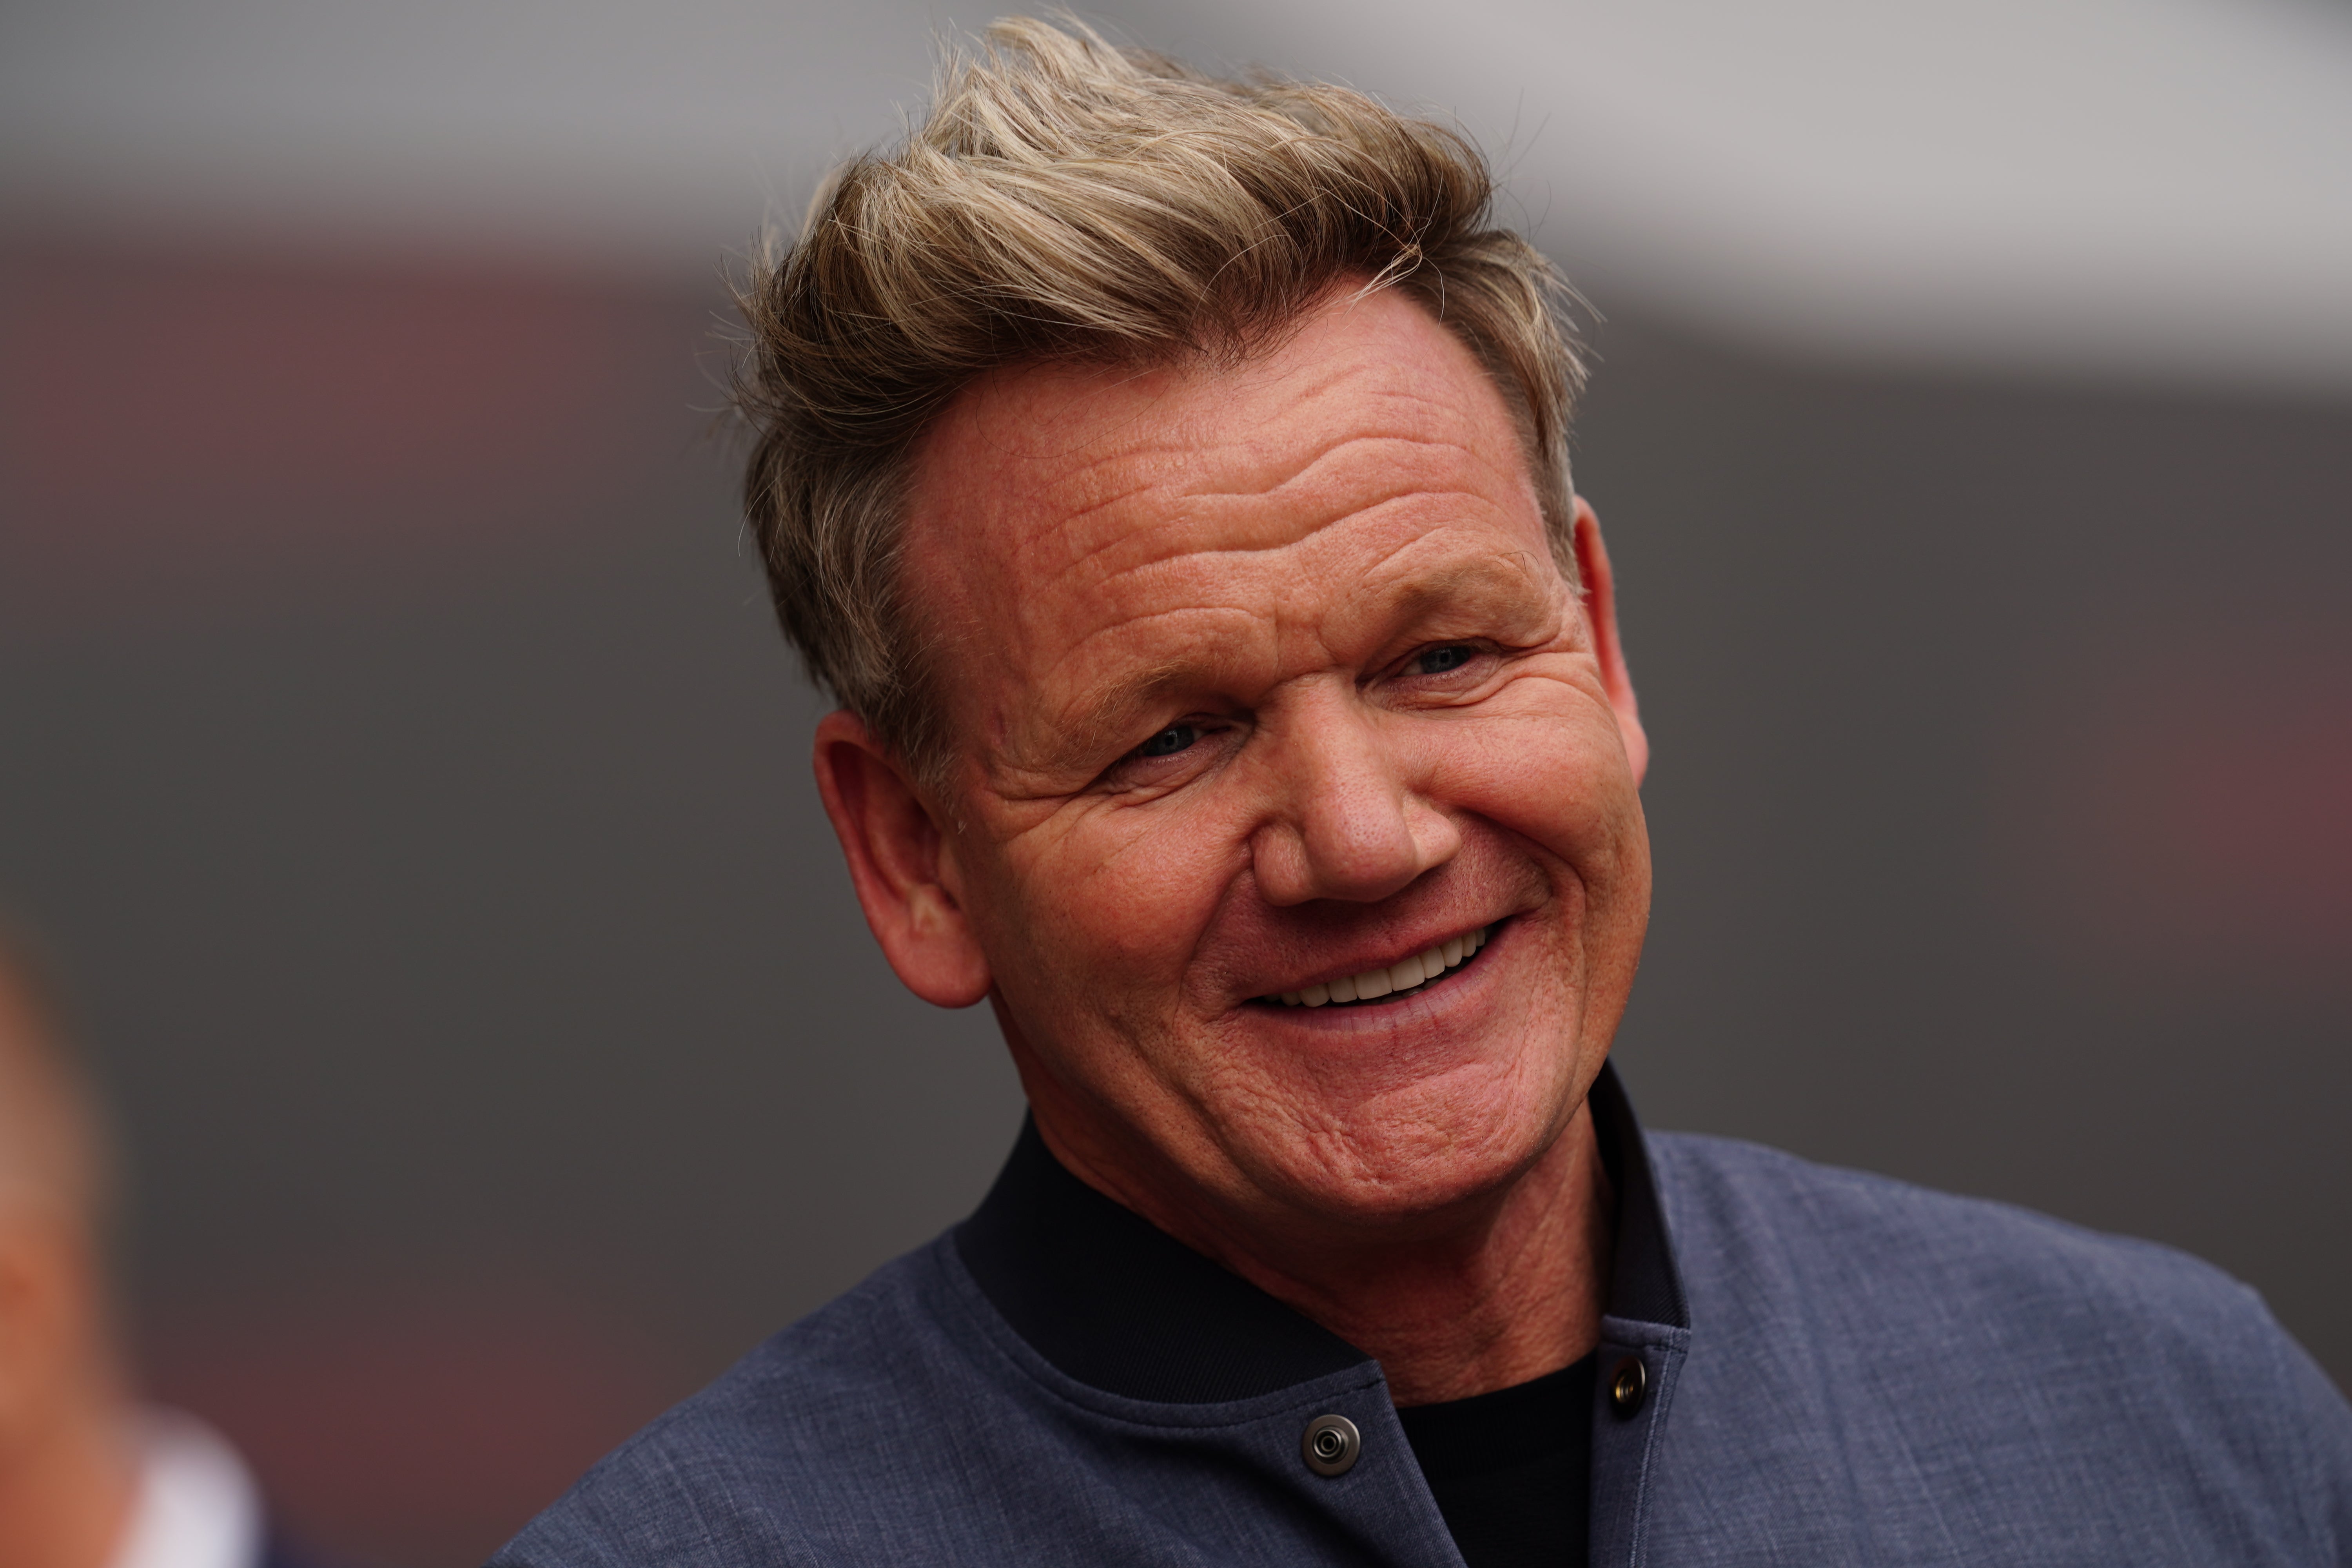 The Gordon Ramsay Academy will also open in the same building